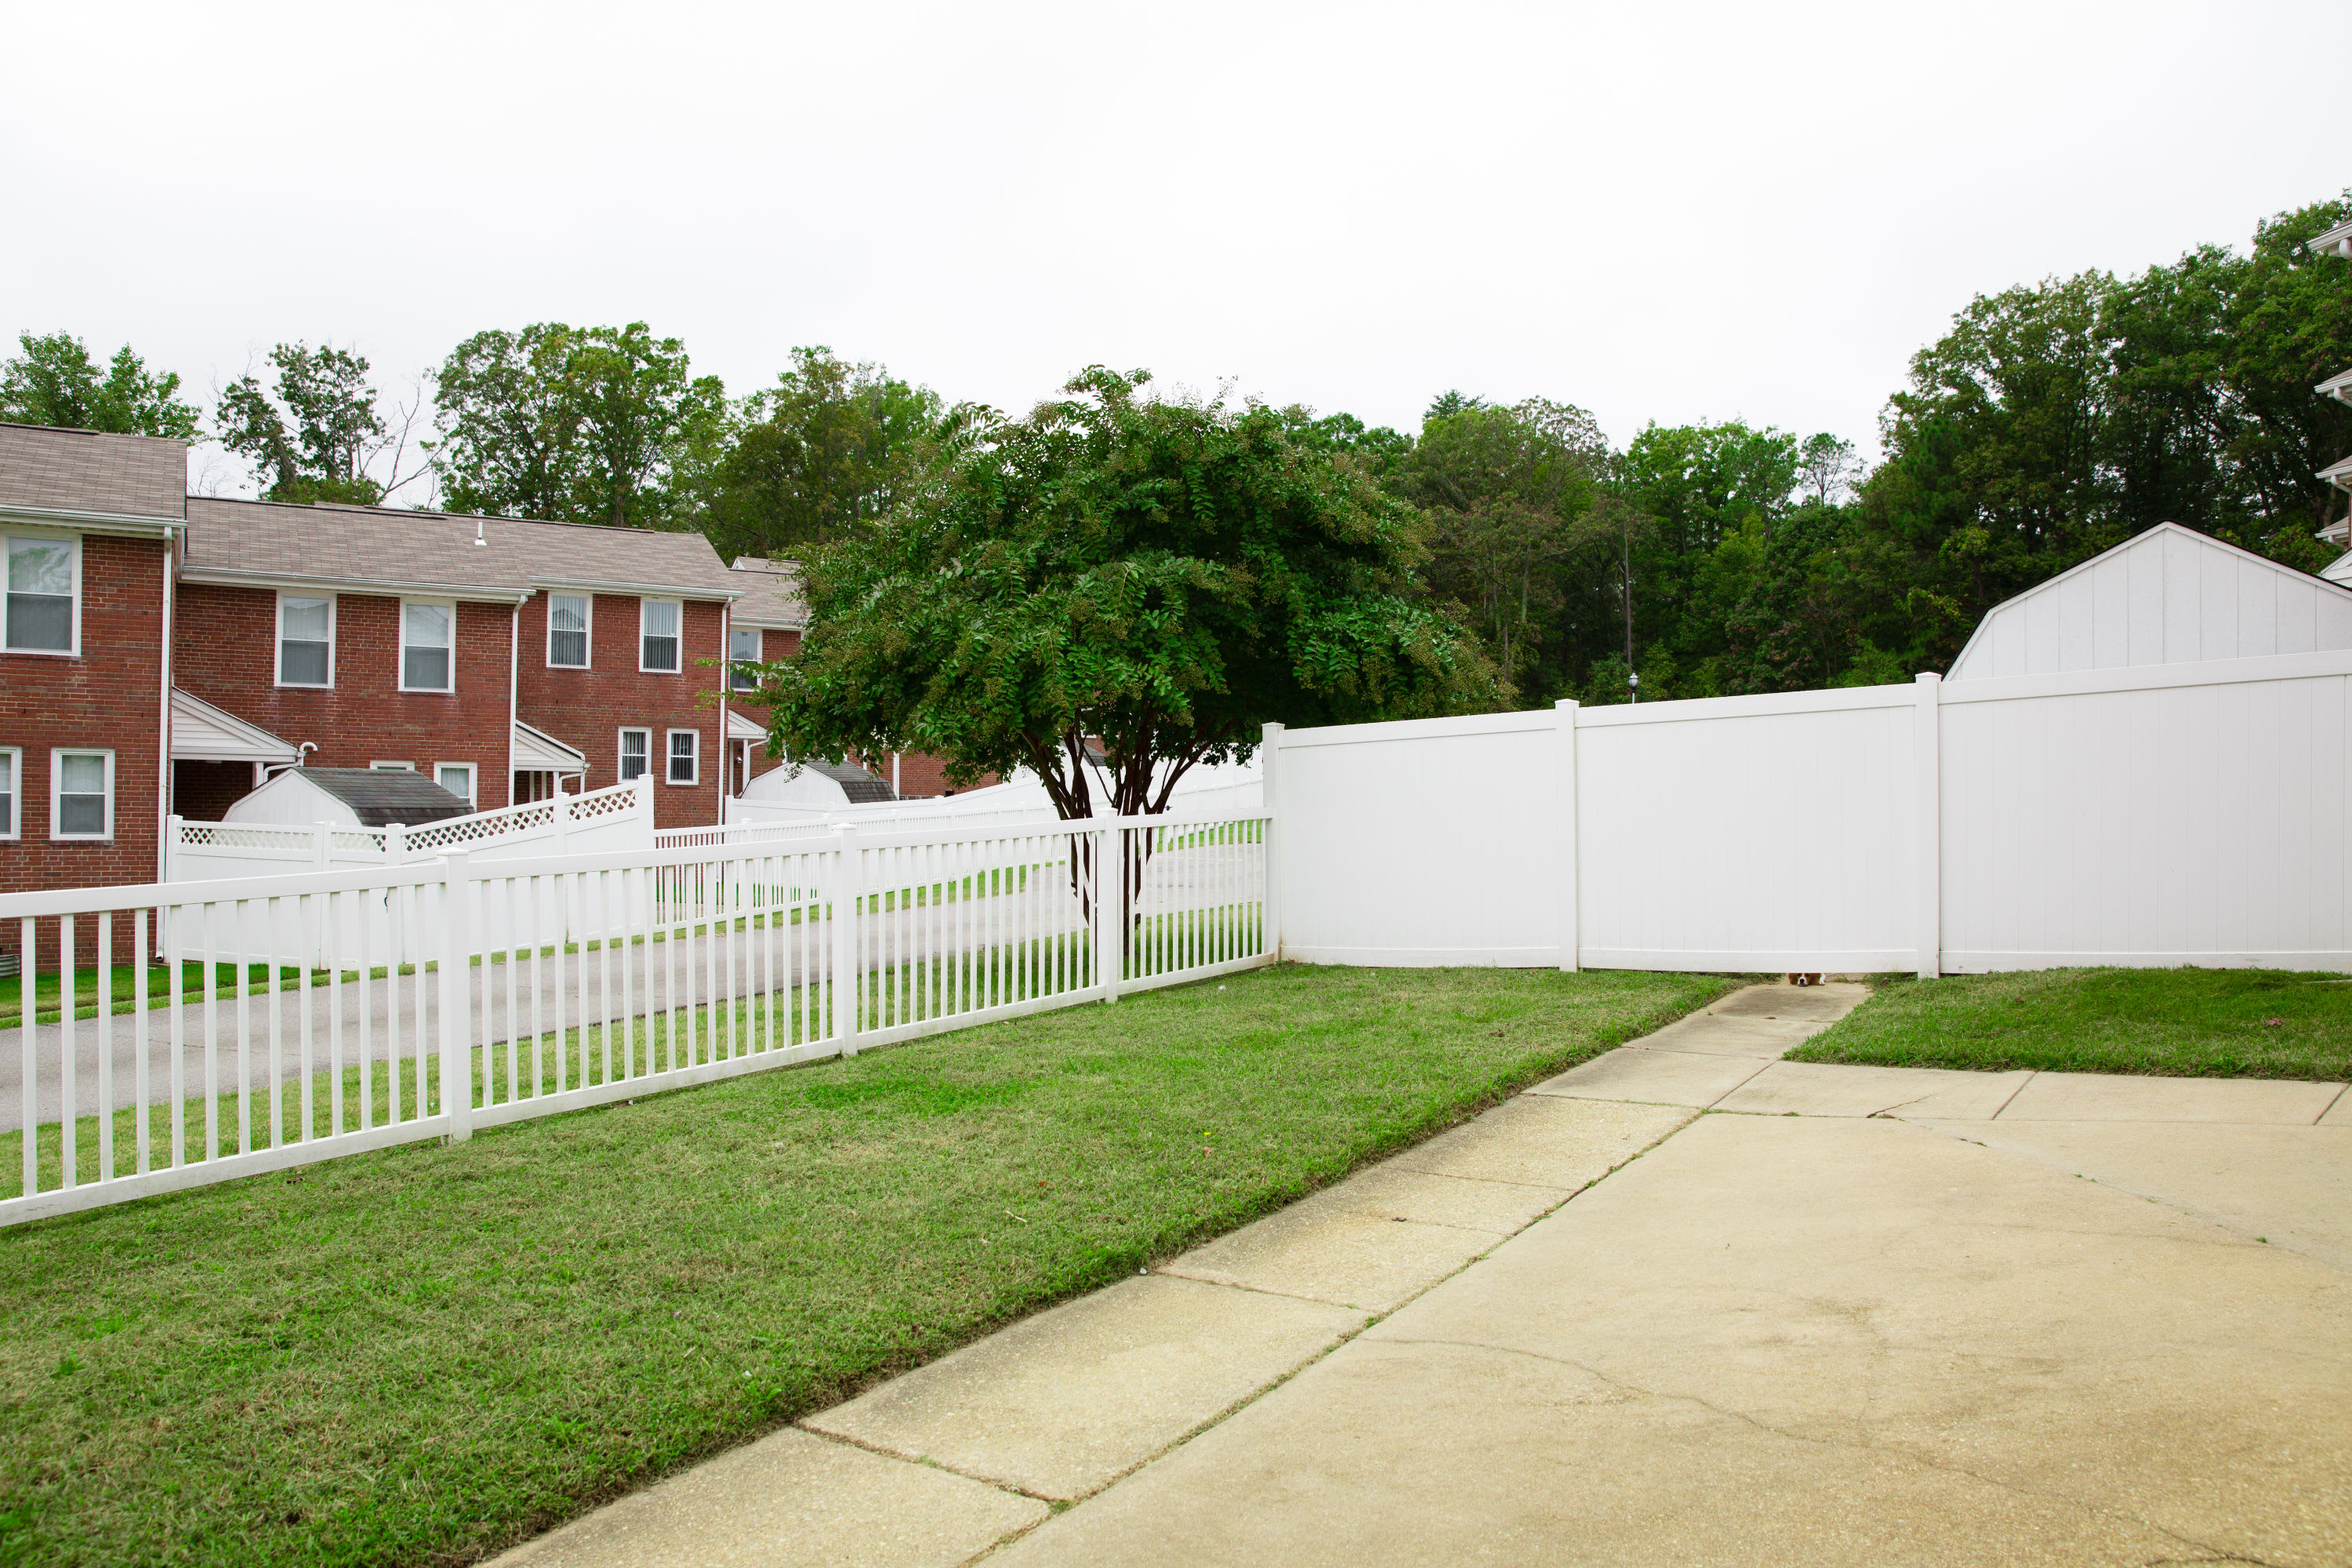 A fenced backyard at Carpenter Park in Patuxent River, Maryland